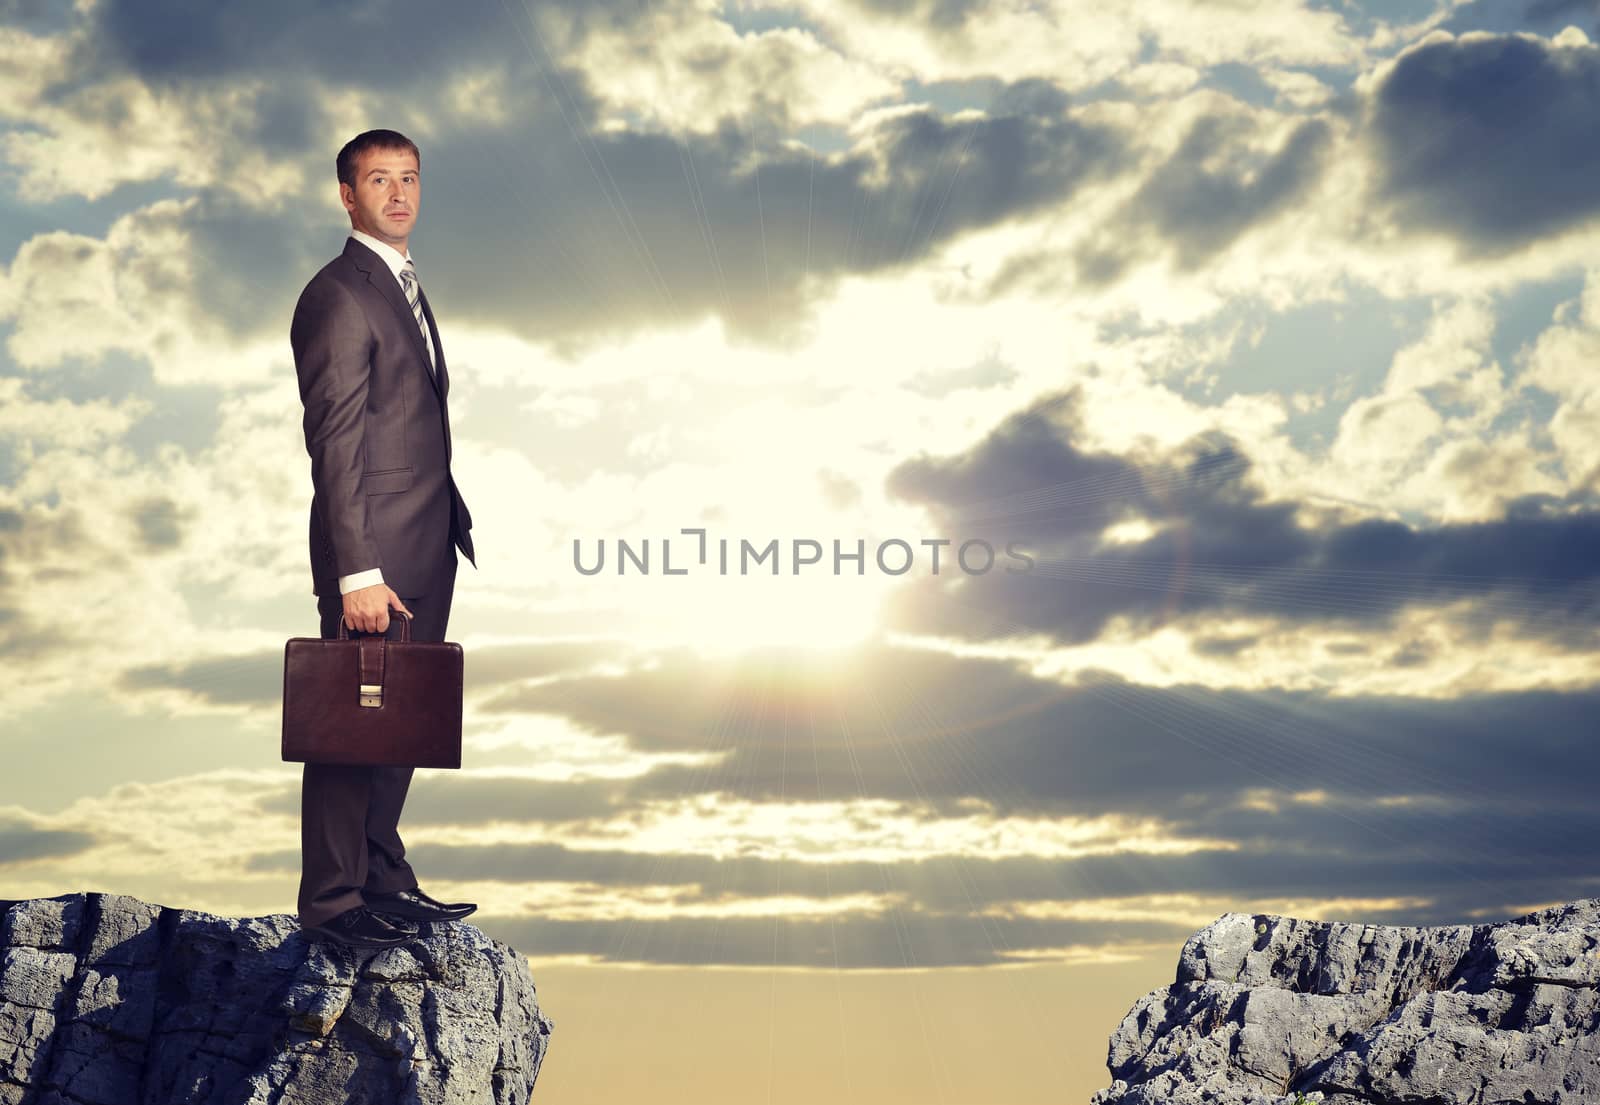 Businesswoman standing on the edge of rock gap, looking at camera as if uncertain. Sky with sun shining through clouds as backdrop